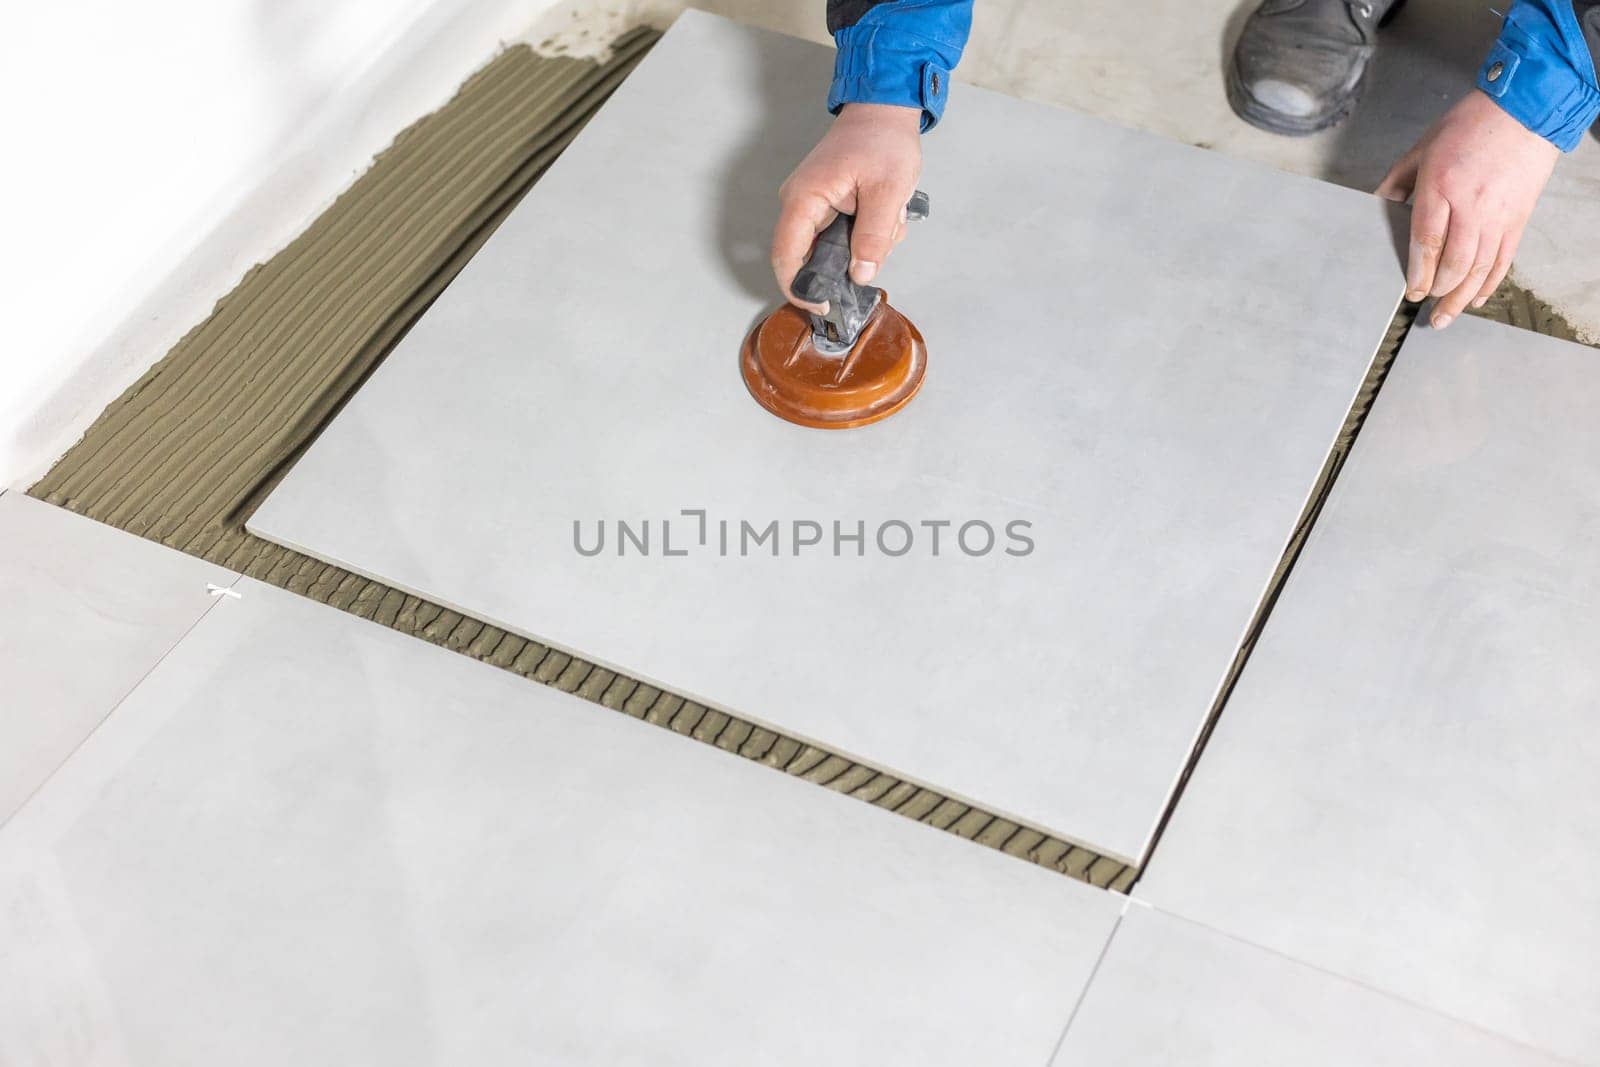 Tiler worker placing or tiling gray ceramic tile in the position over adhesive glue with lash tile leveling system, renovation or recontruction, concept of building by Kadula